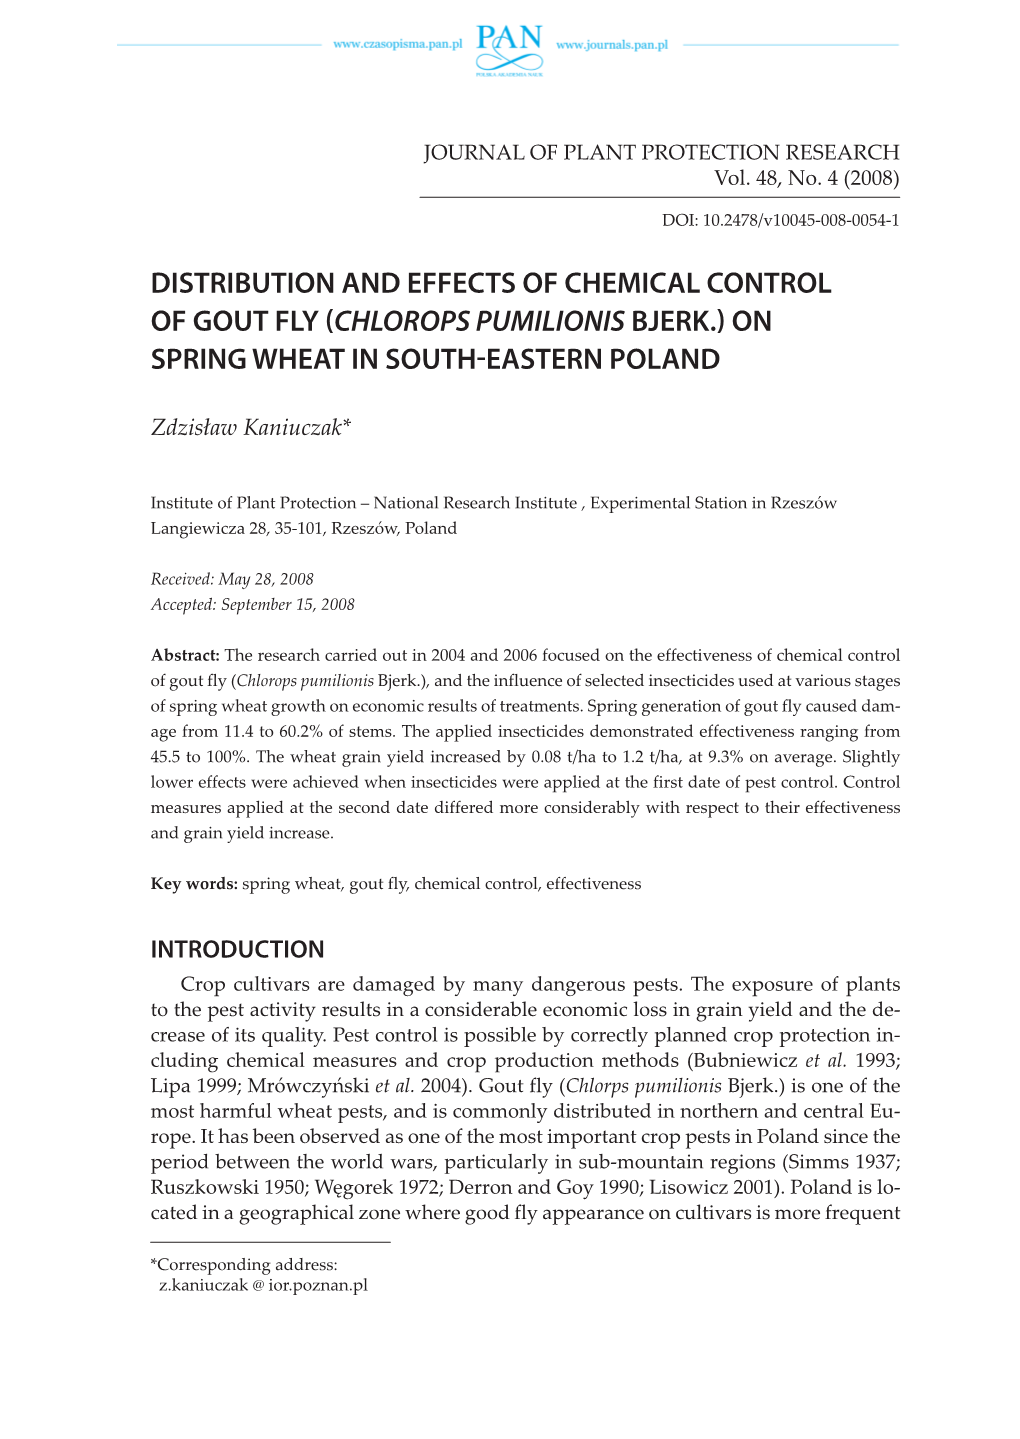 Distribution and Effects of Chemical Control of Gout Fly (Chlorops Pumilionis Bjerk.) on Spring Wheat in South-Eastern Poland